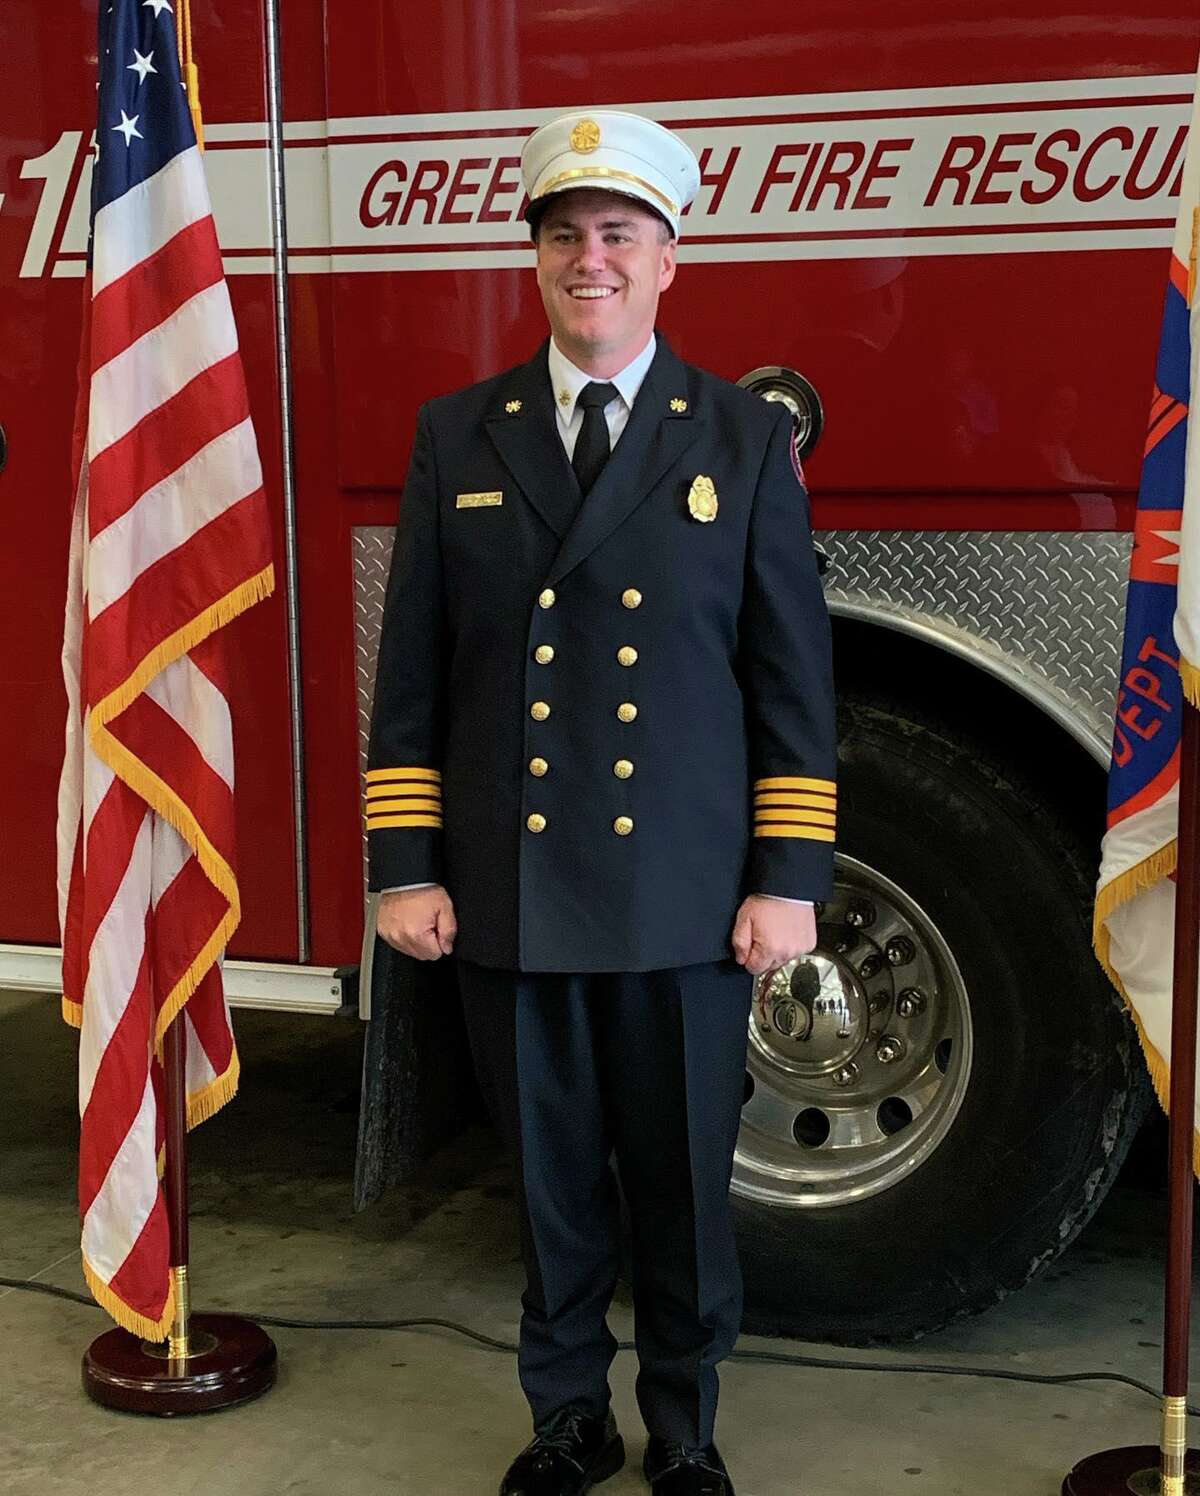 Charlie Lubowicki, formerly of the Hamden Fire Department, was sworn in Thursday as the Assistant Chief of Administration, a new position for the Greenwich Fire Department.